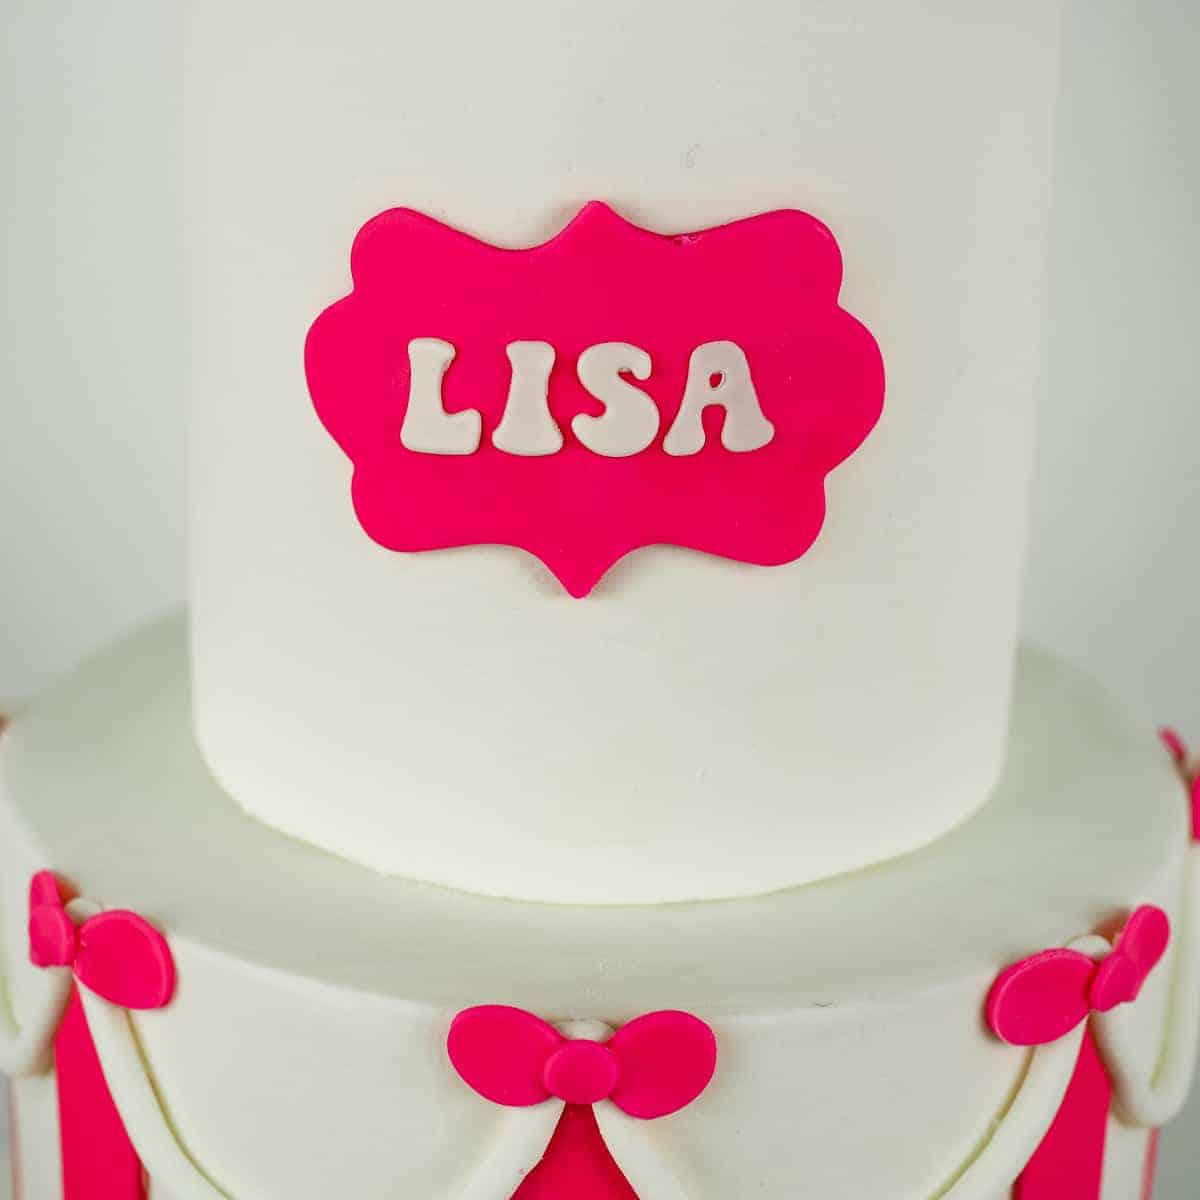 Cake Lettering How To Center Letters On Cakes Decorated Treats